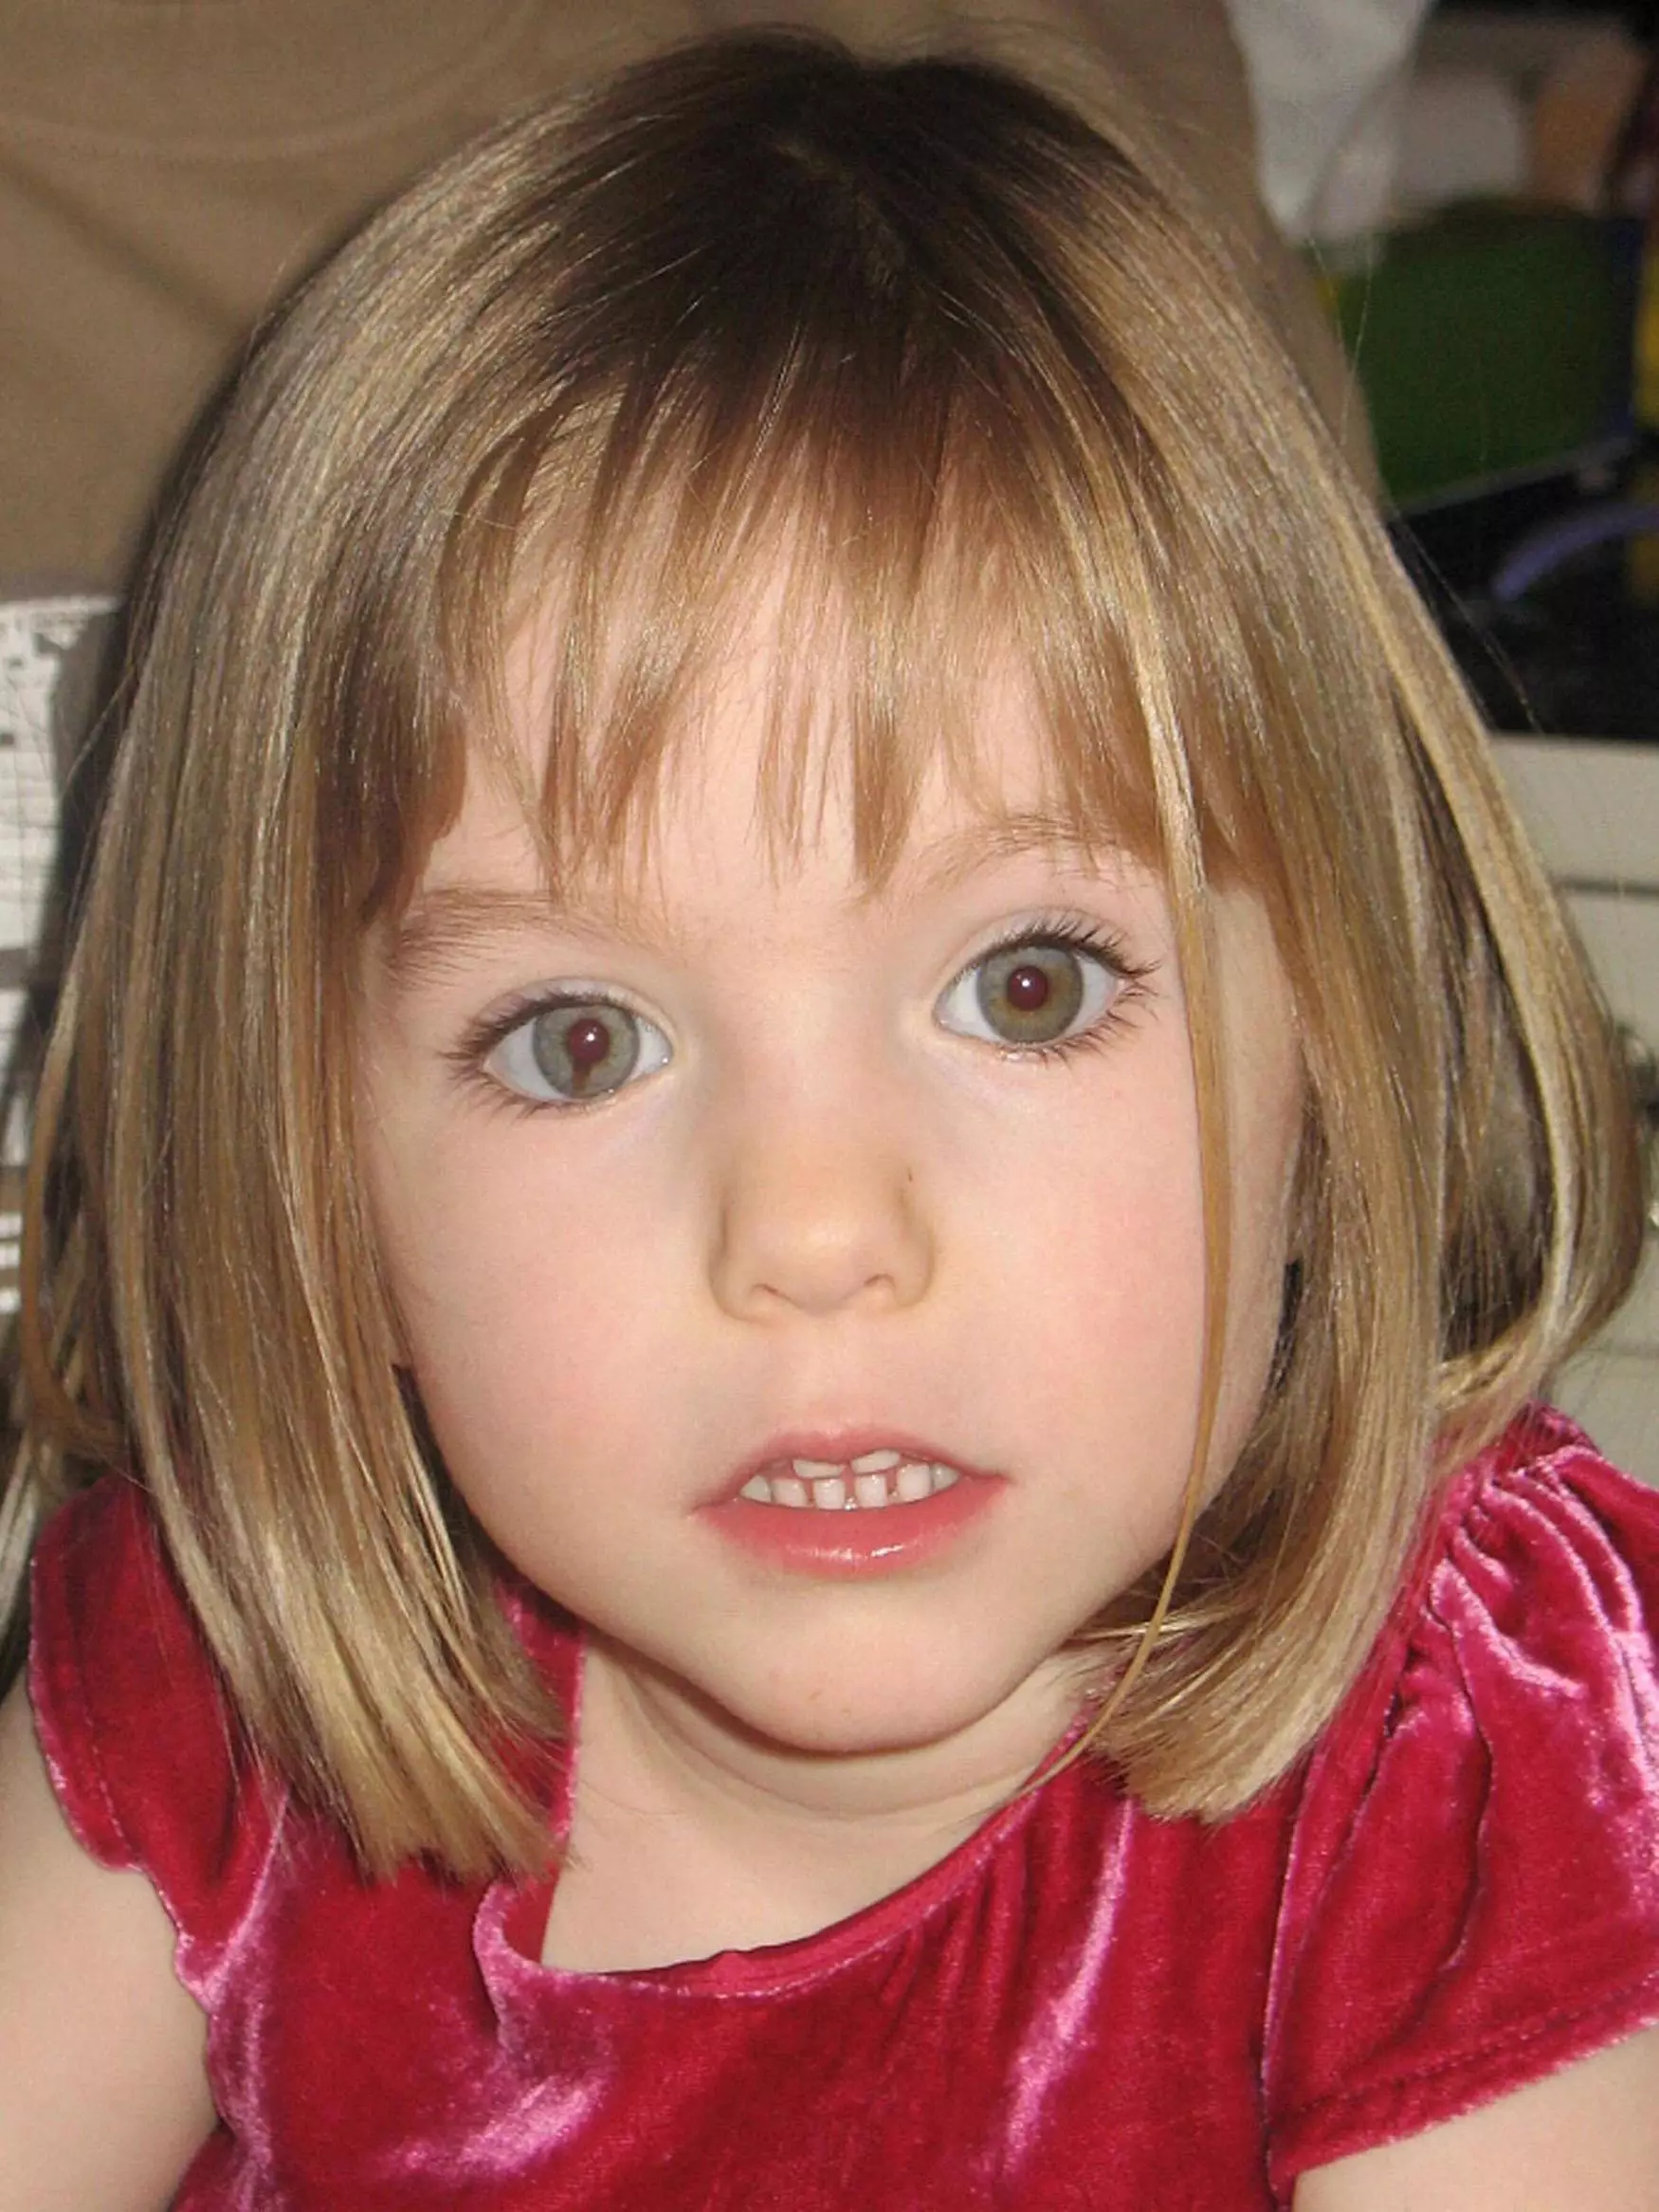 Madeleine McCann disappeared in 2007, when she was just three years old.